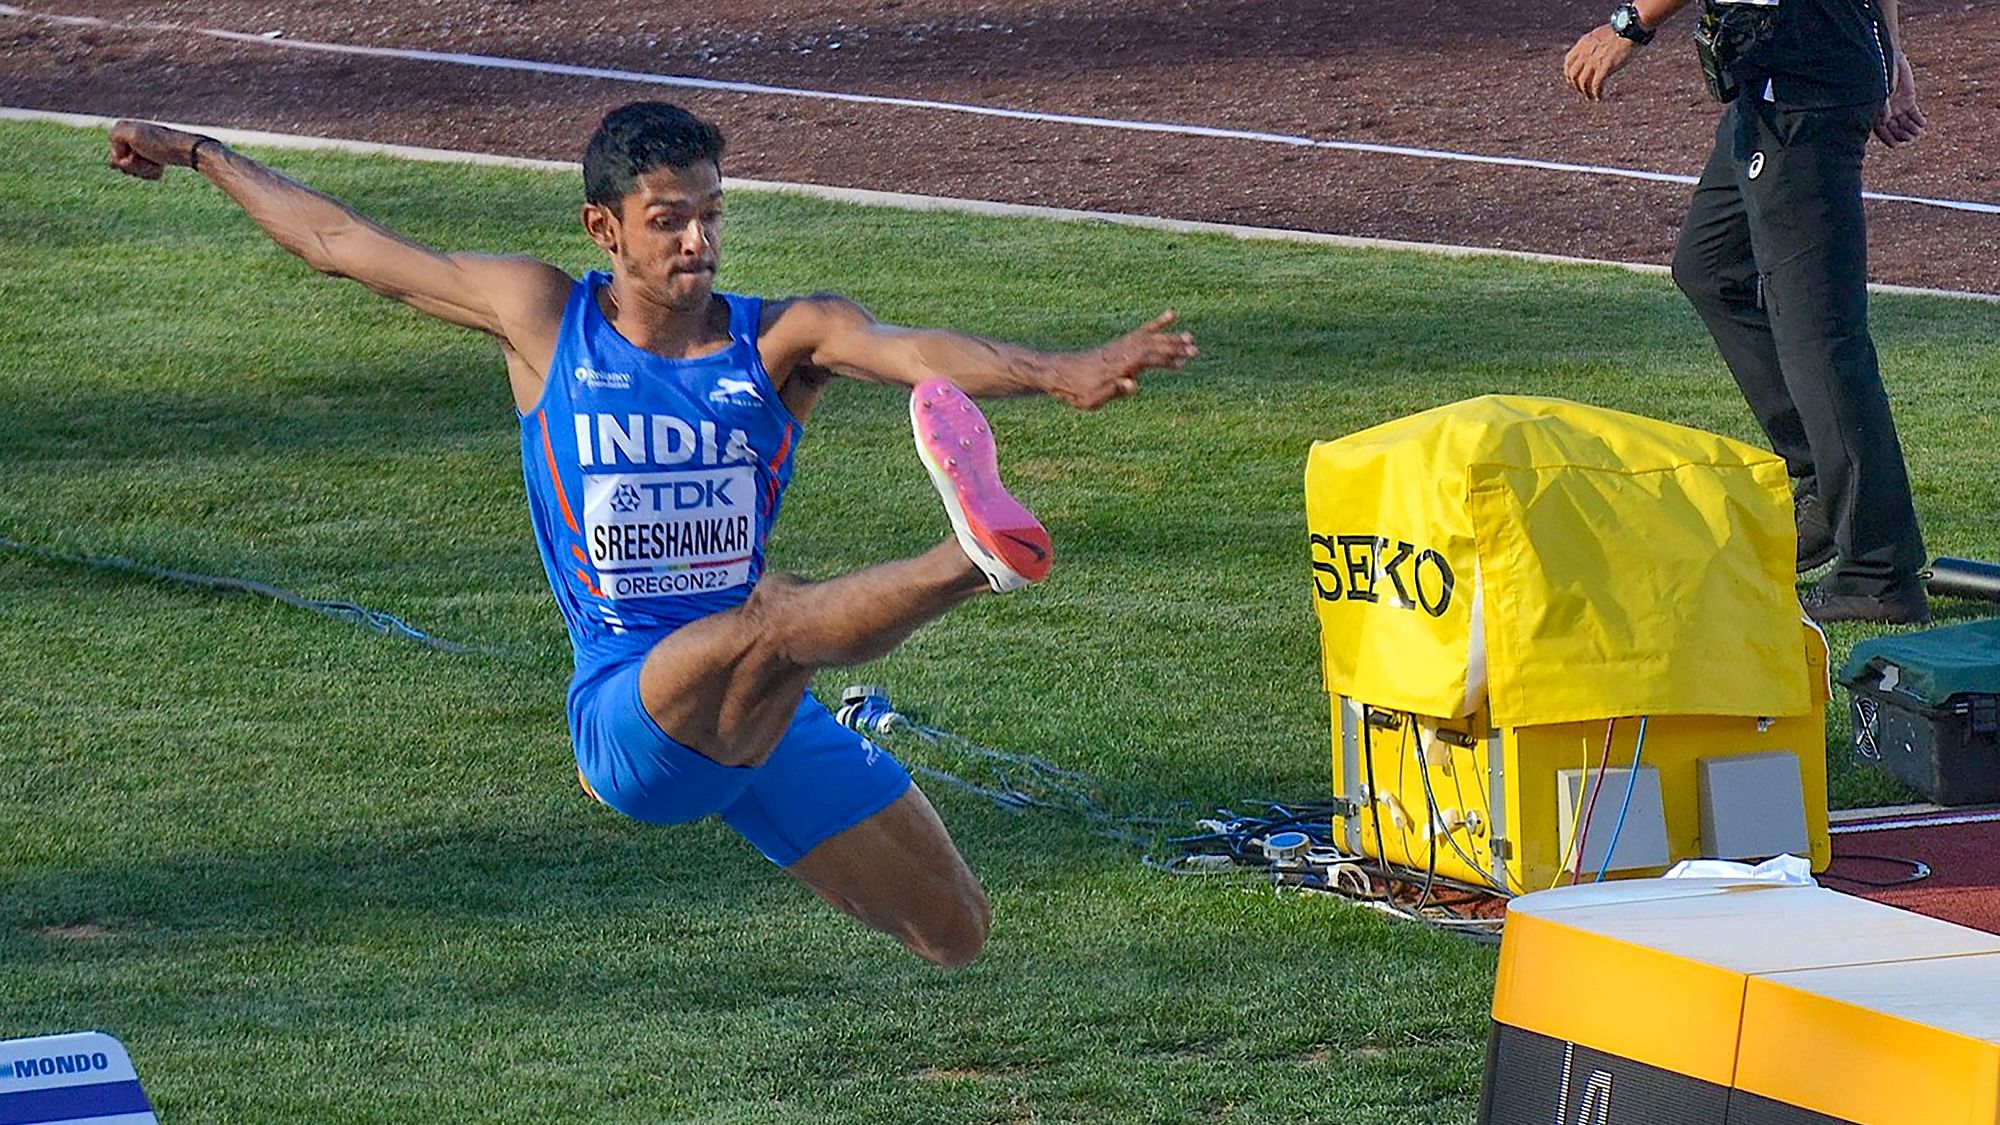 <div class="paragraphs"><p>Eugene: India's Murali Sreeshankar competes in the long jump event at the World Athletics Championships.</p></div>